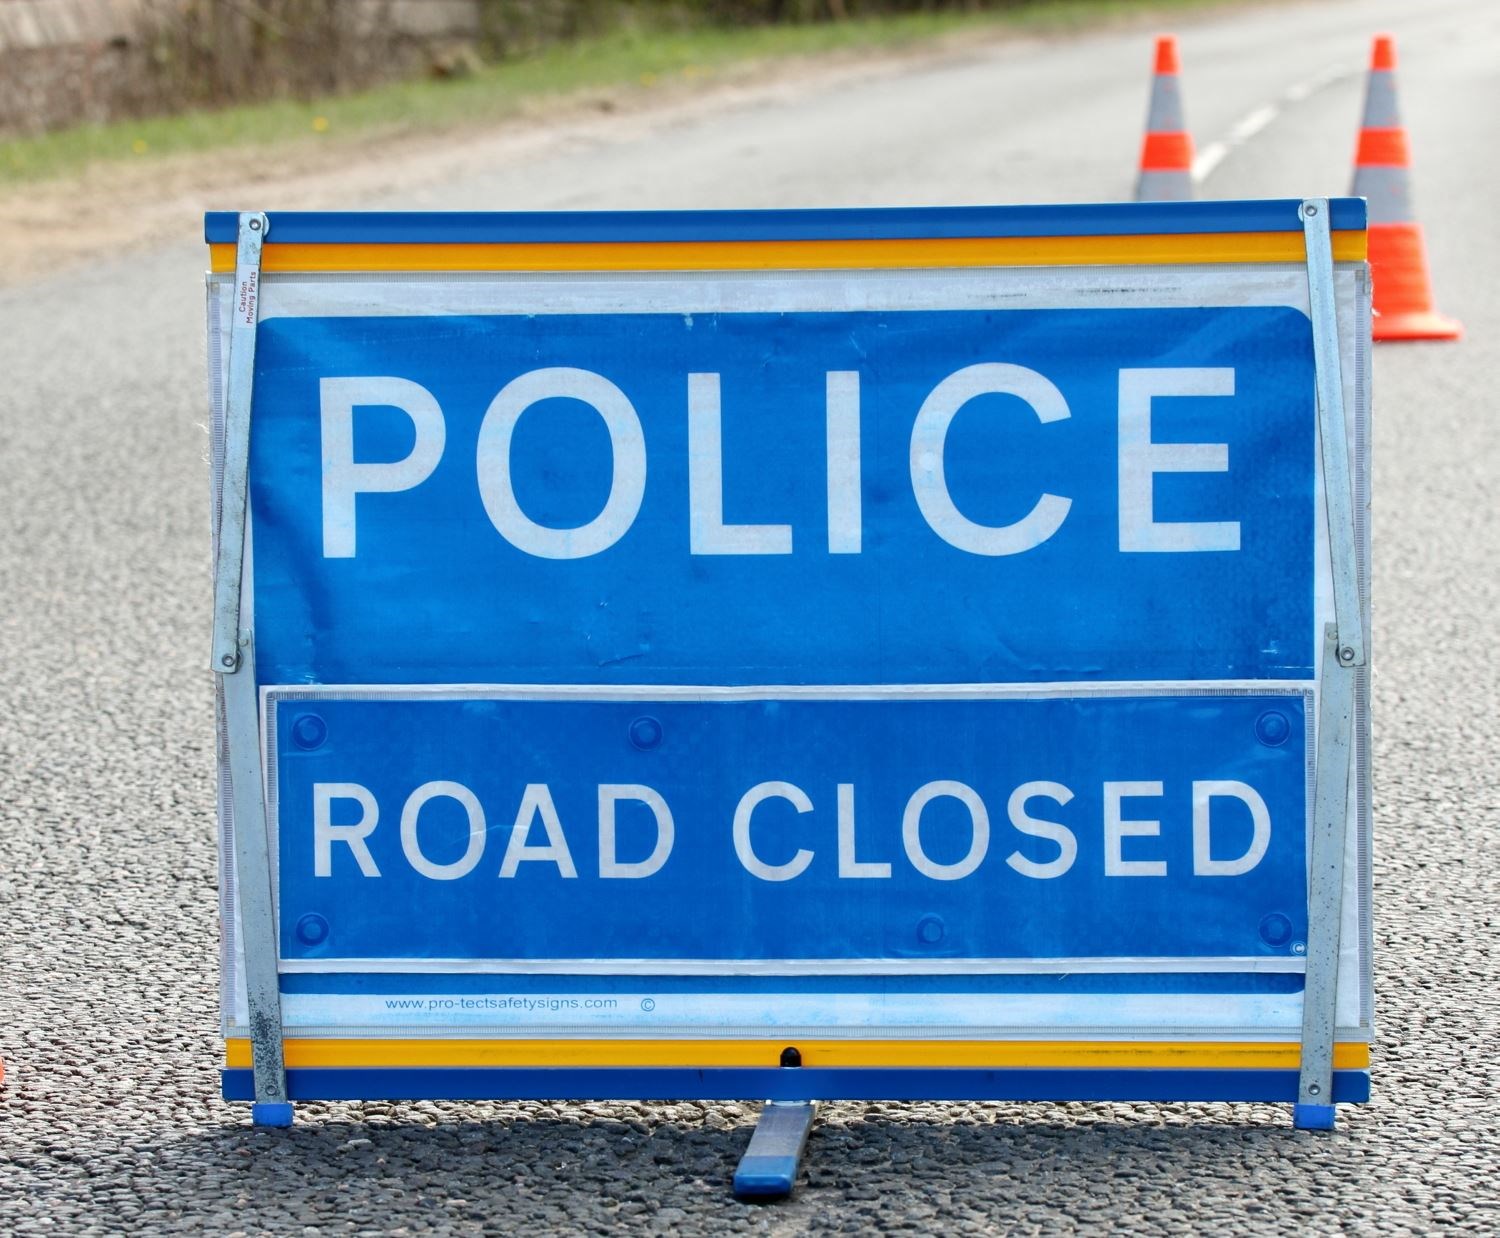 A section of the A98 remains closed due to police accident investigation work.